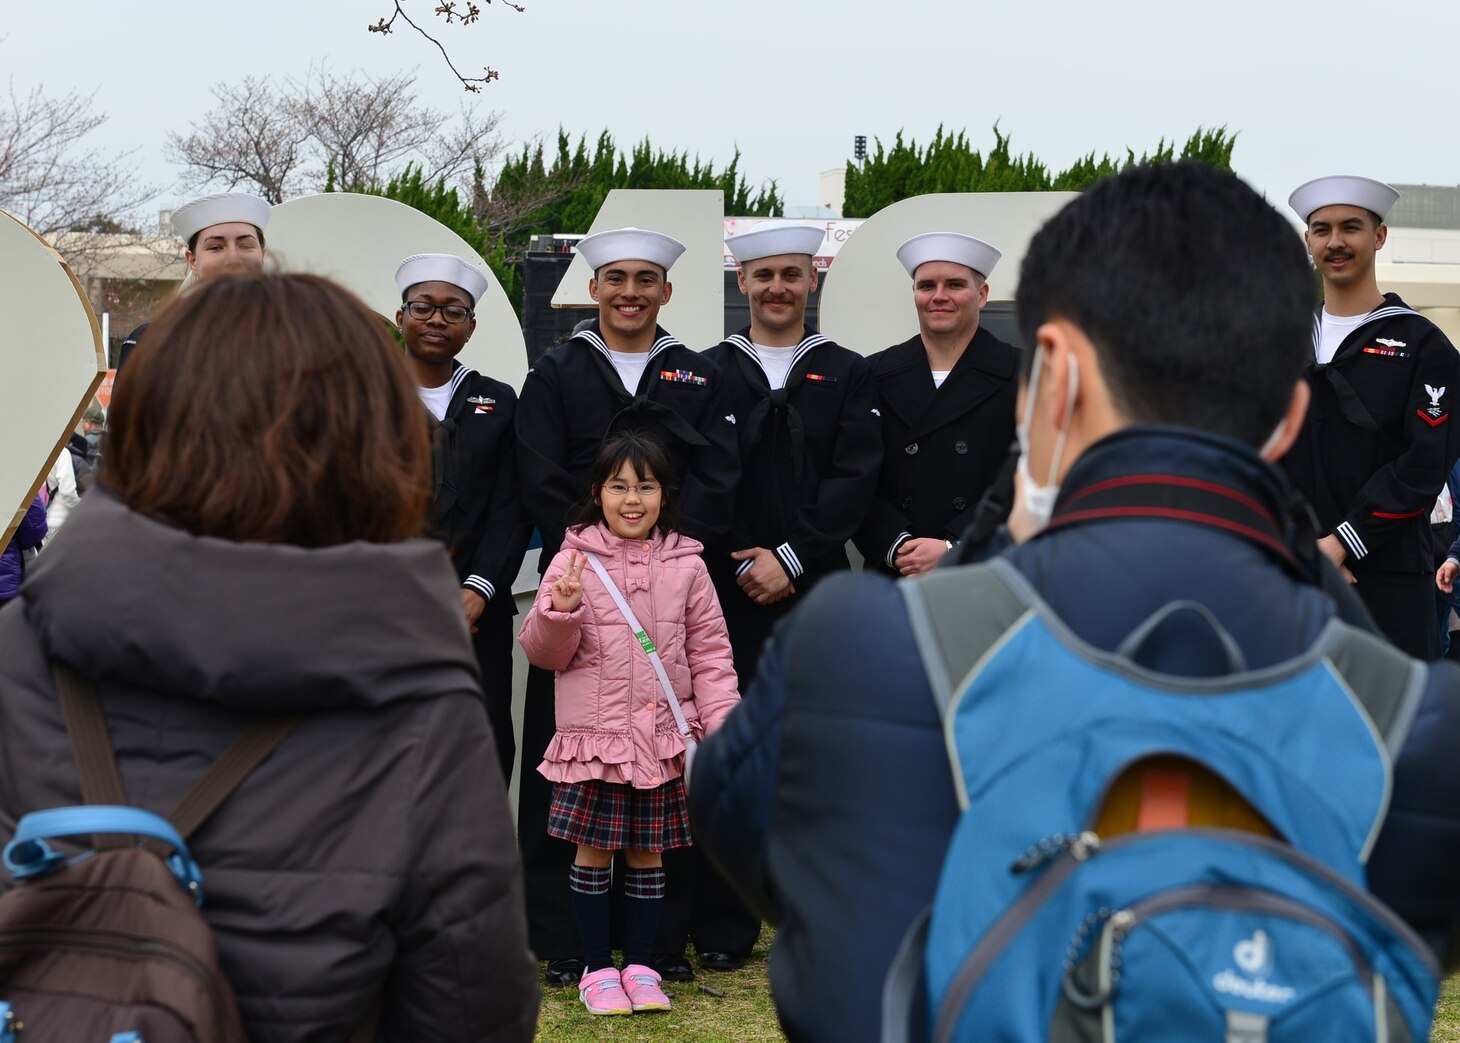 Sailors assigned to the USS Ronald Reagan (CVN 76) pose for photos with visitors during the 26th annual Spring Festival, March 30 onboard Fleet Activities (FLEACT) Yokosuka. FLEACT Yokosuka provides, maintains, and operates base facilities and services in support of the U.S. 7th Fleet's forward-deployed naval forces, 71 tenant commands, and more than 27,000 military and civilian personnel.